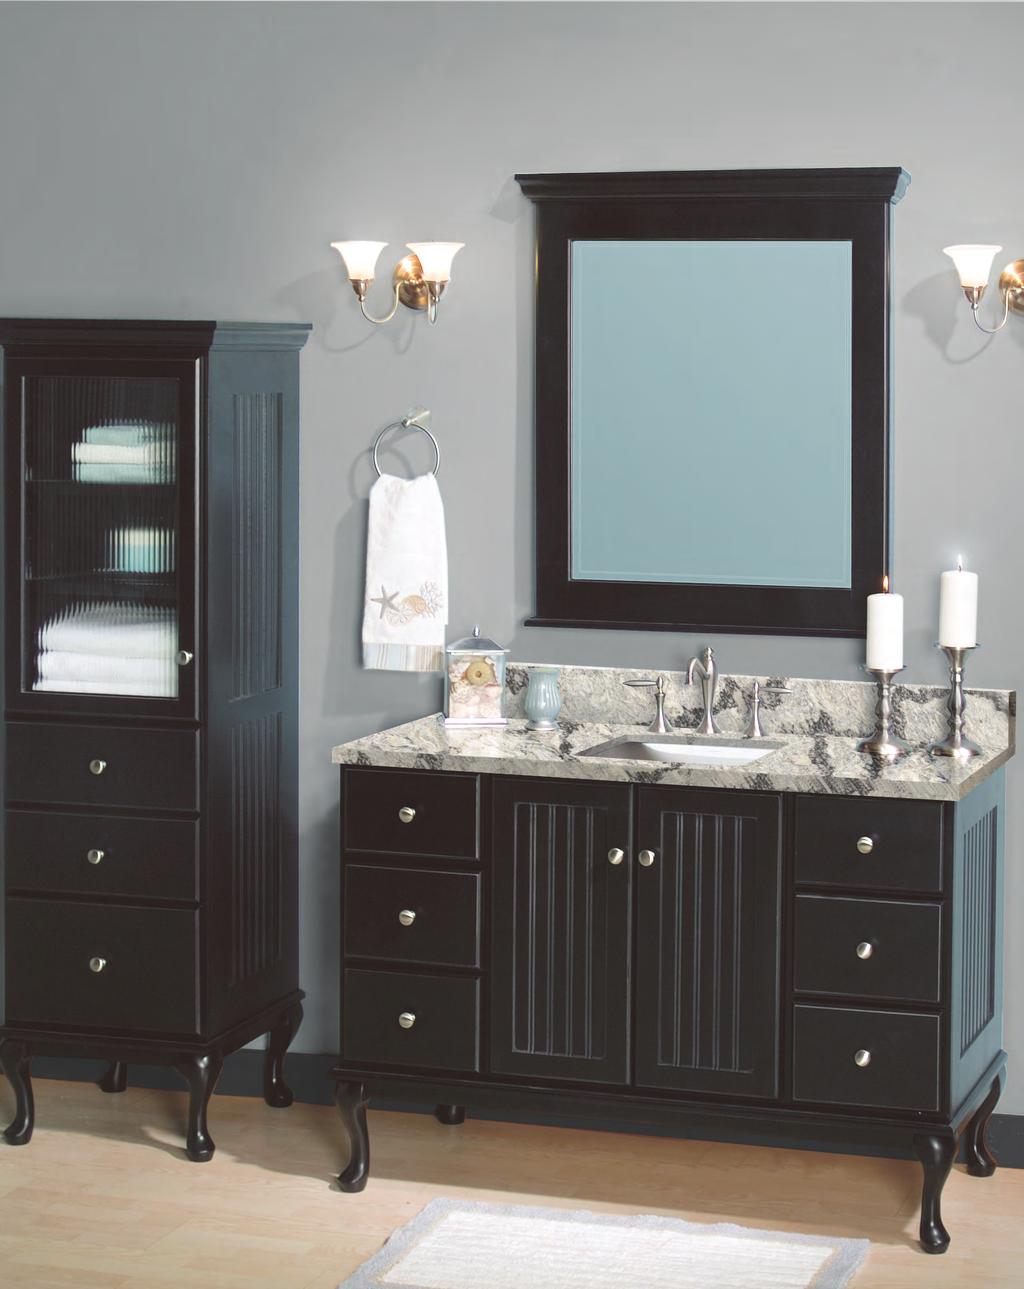 Ashford 48 dresser vanity and linen tower with optional Queen Anne legs and